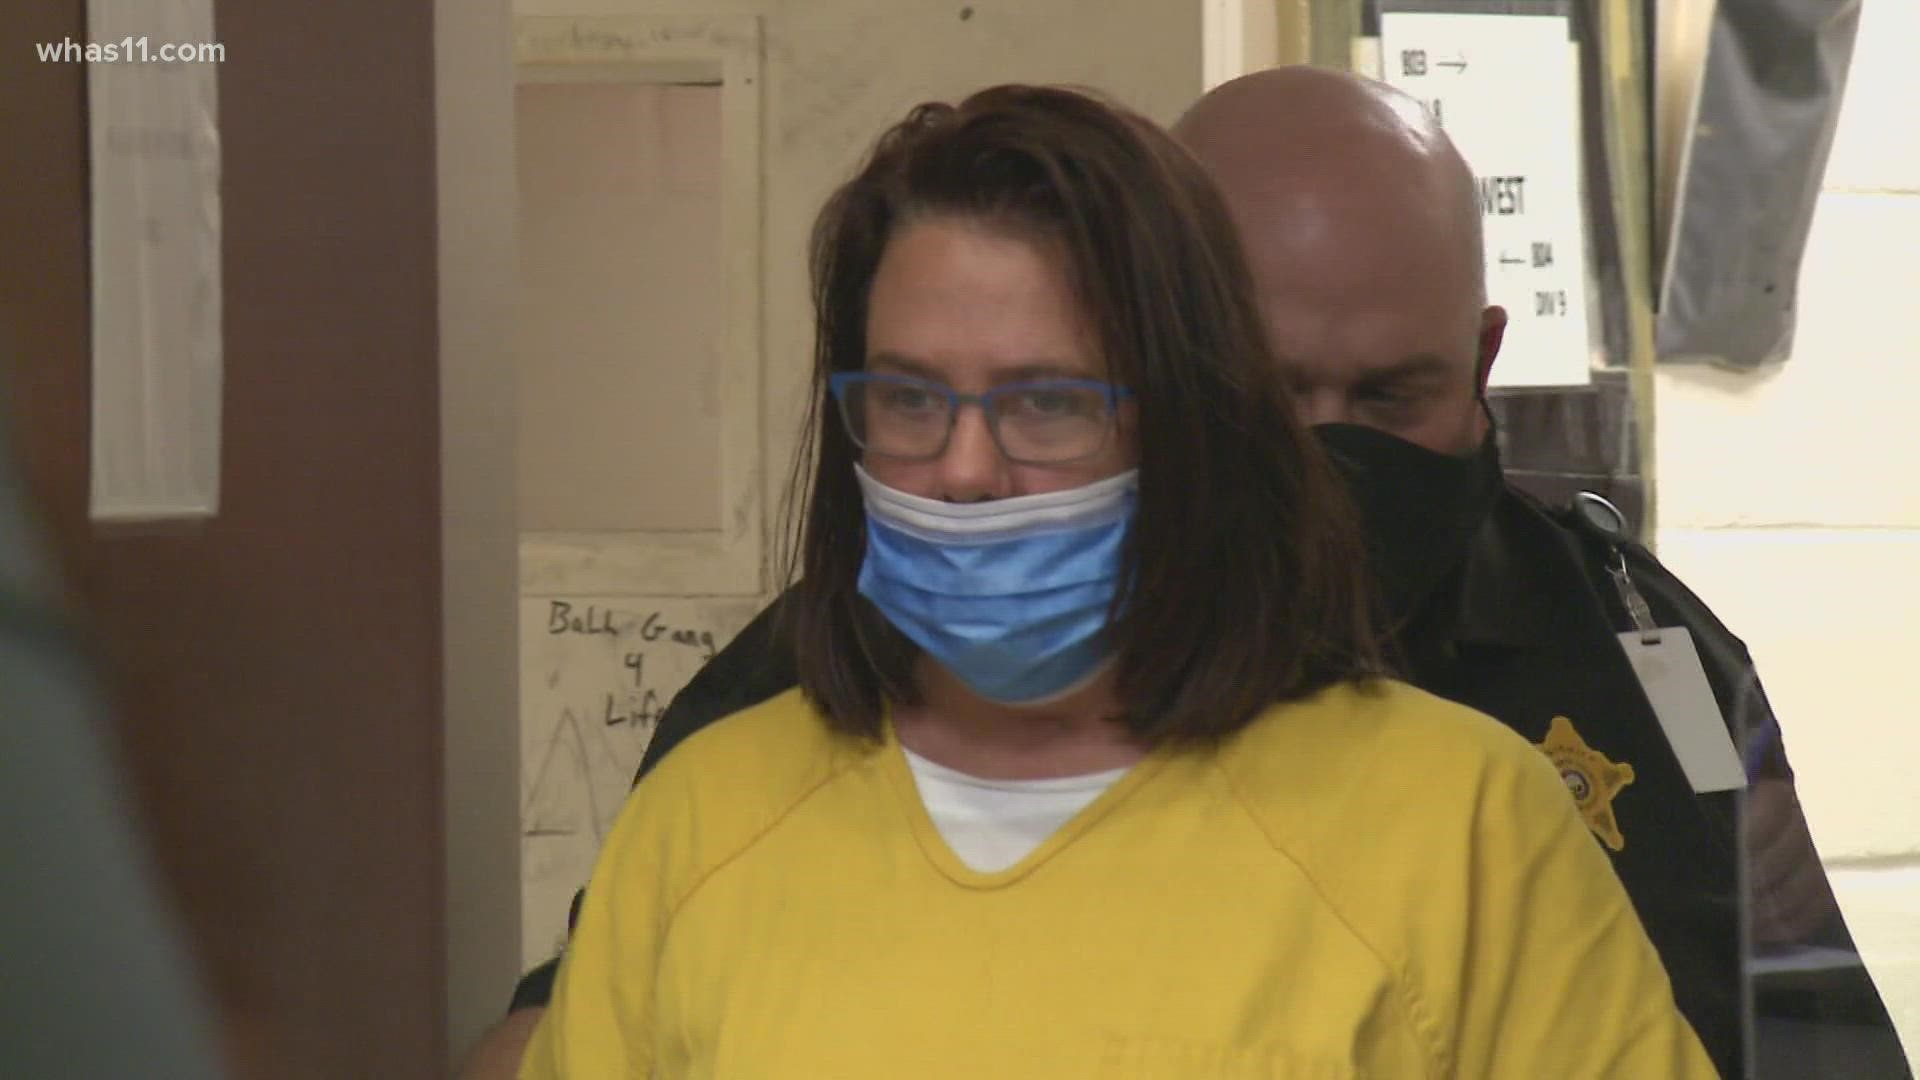 Rebecca Johnson was sentenced to probation in 2018. Now a probation violation could put her in prison for the first time.